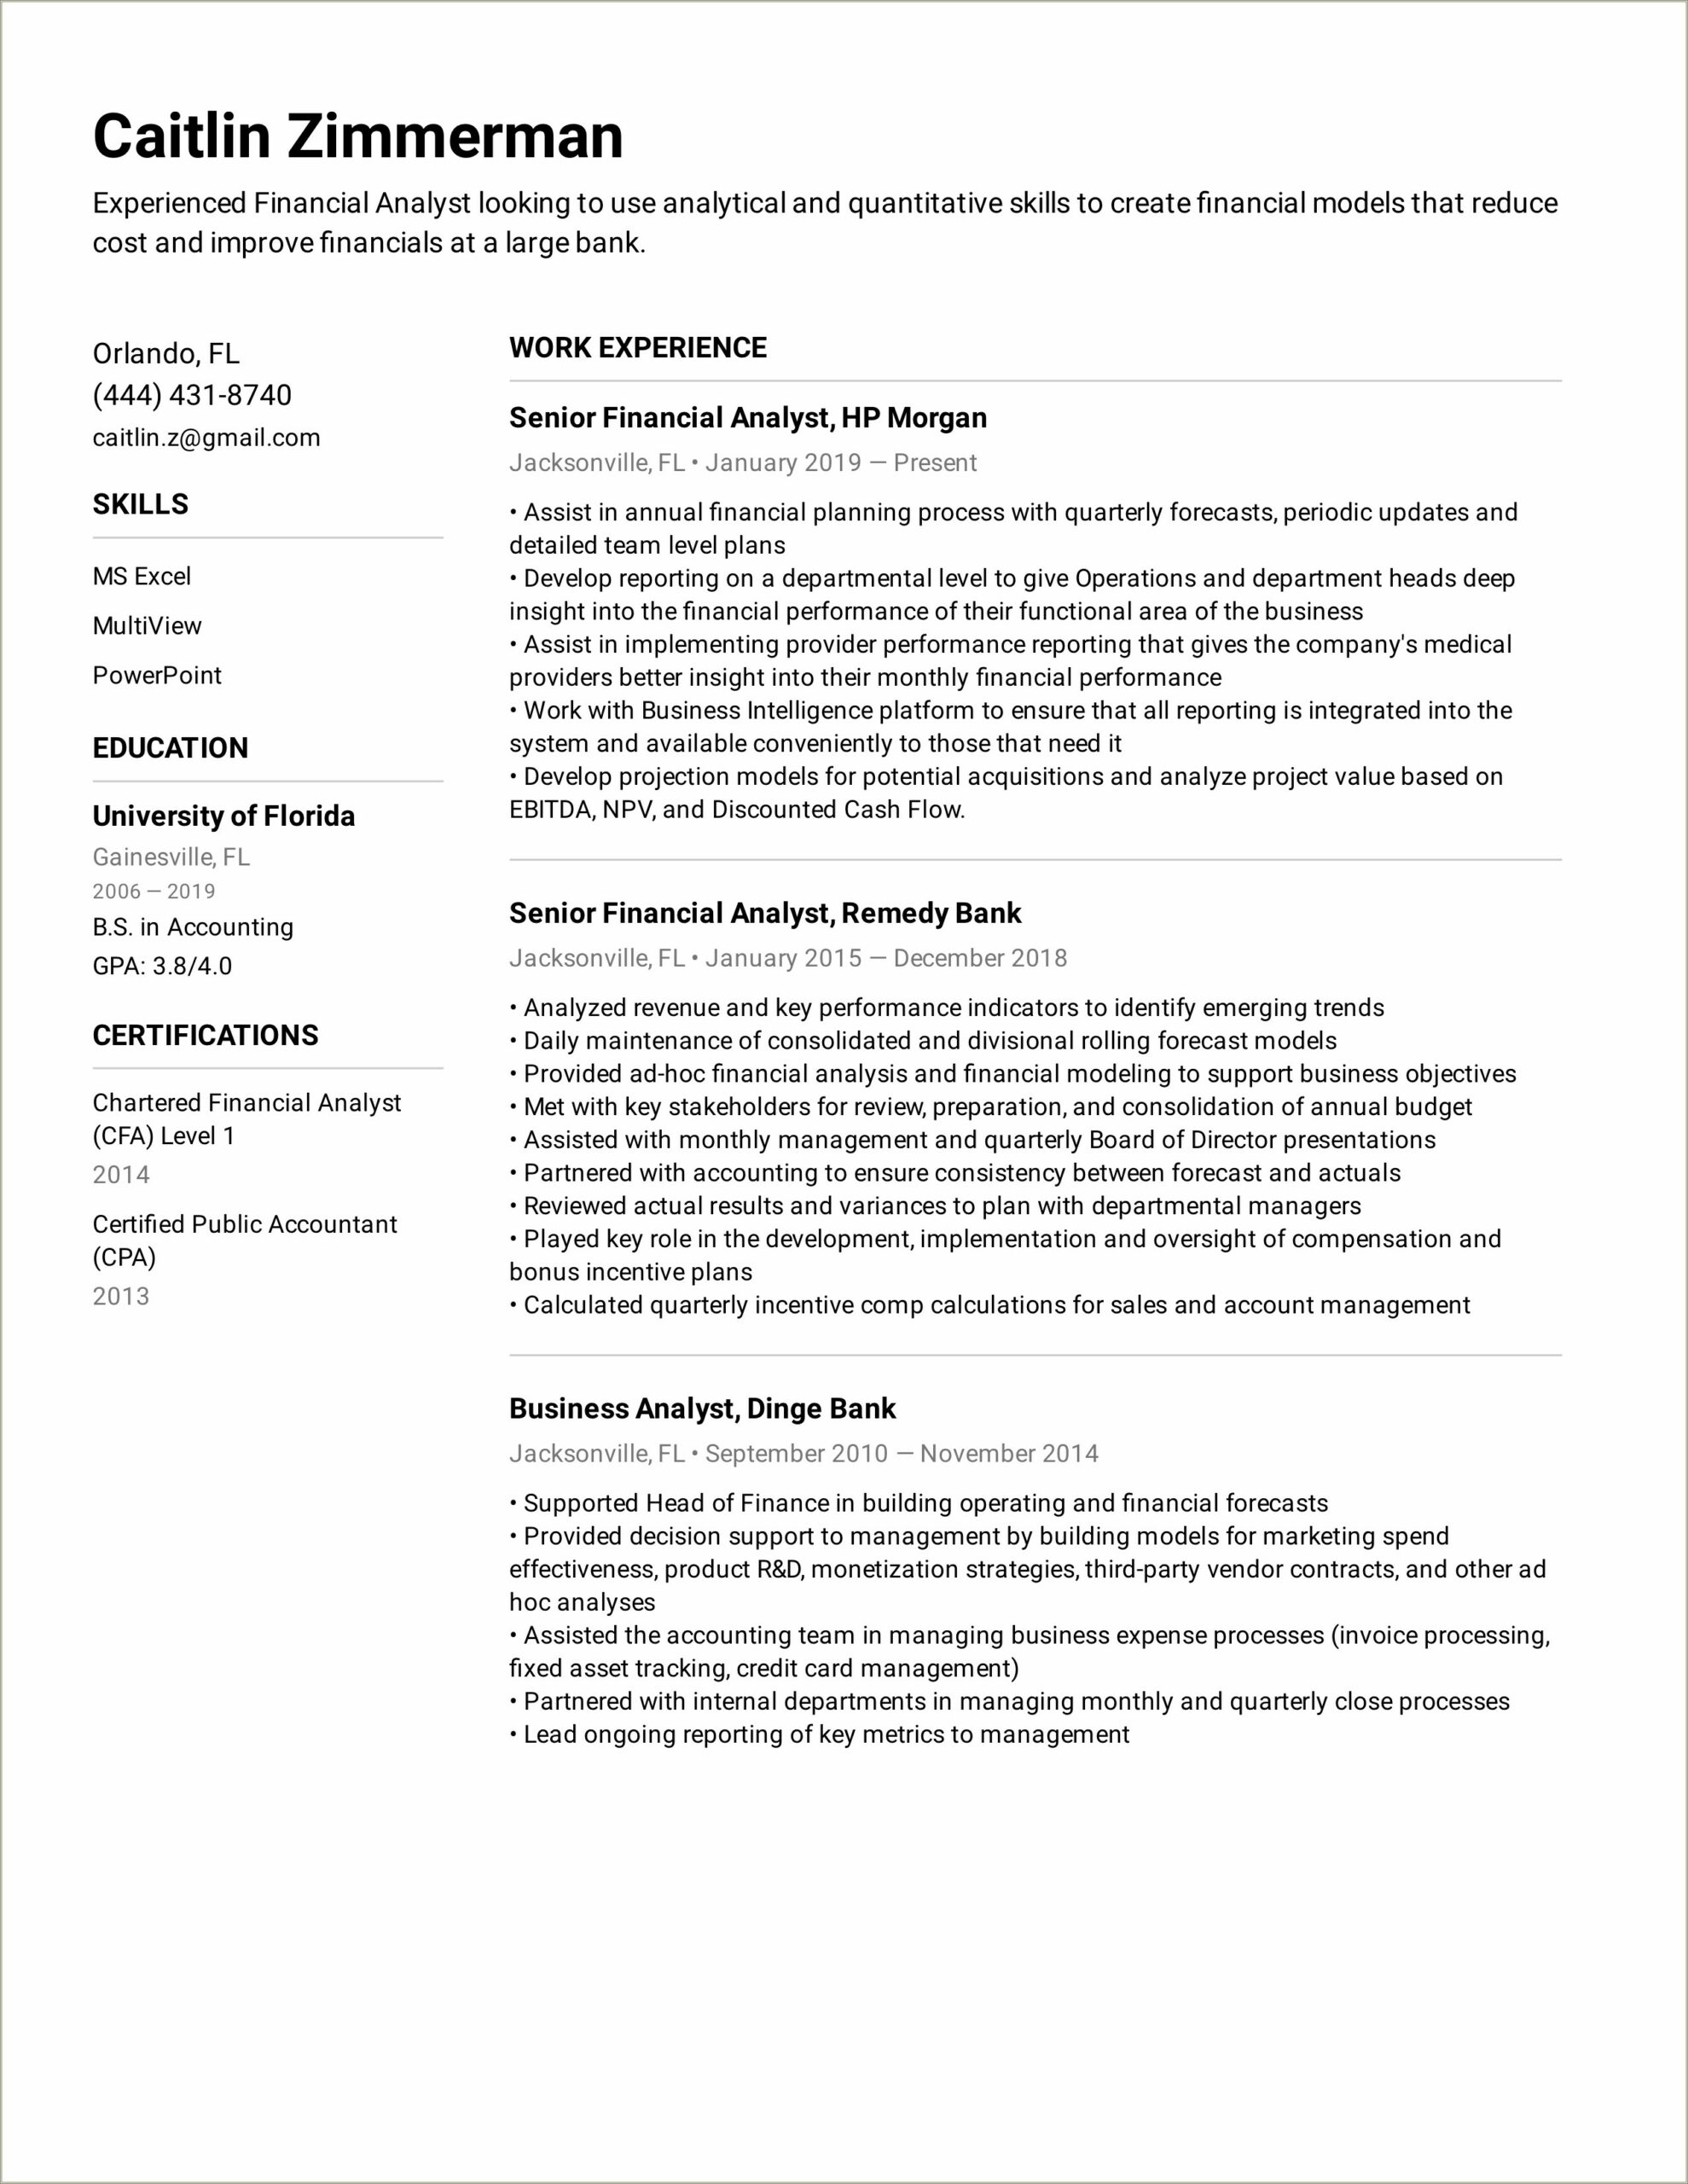 Example Resume For An Fp&a Analyst